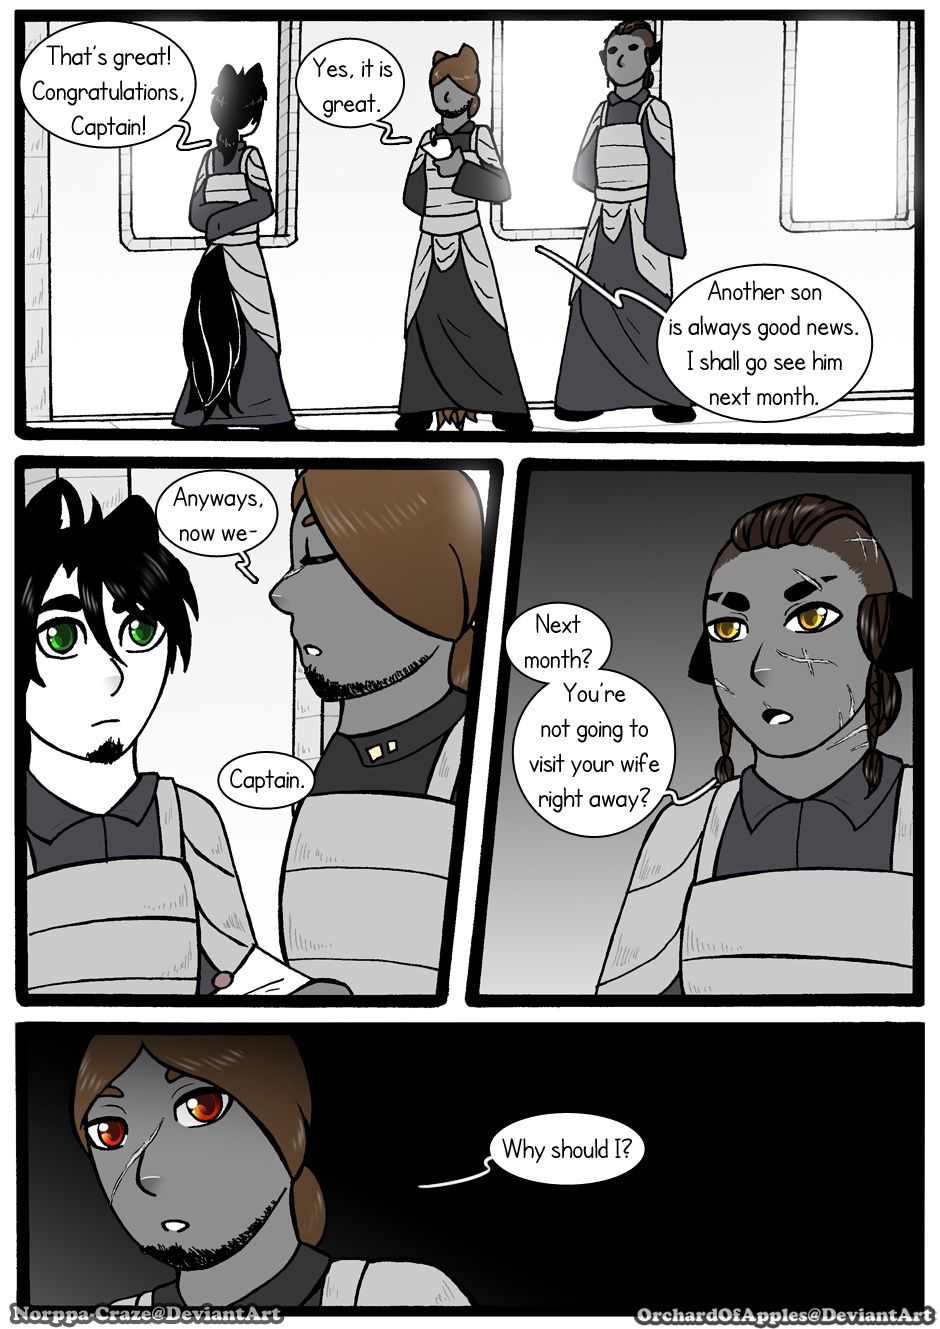 [Jeny-jen94] Between Kings and Queens [Ongoing] 296